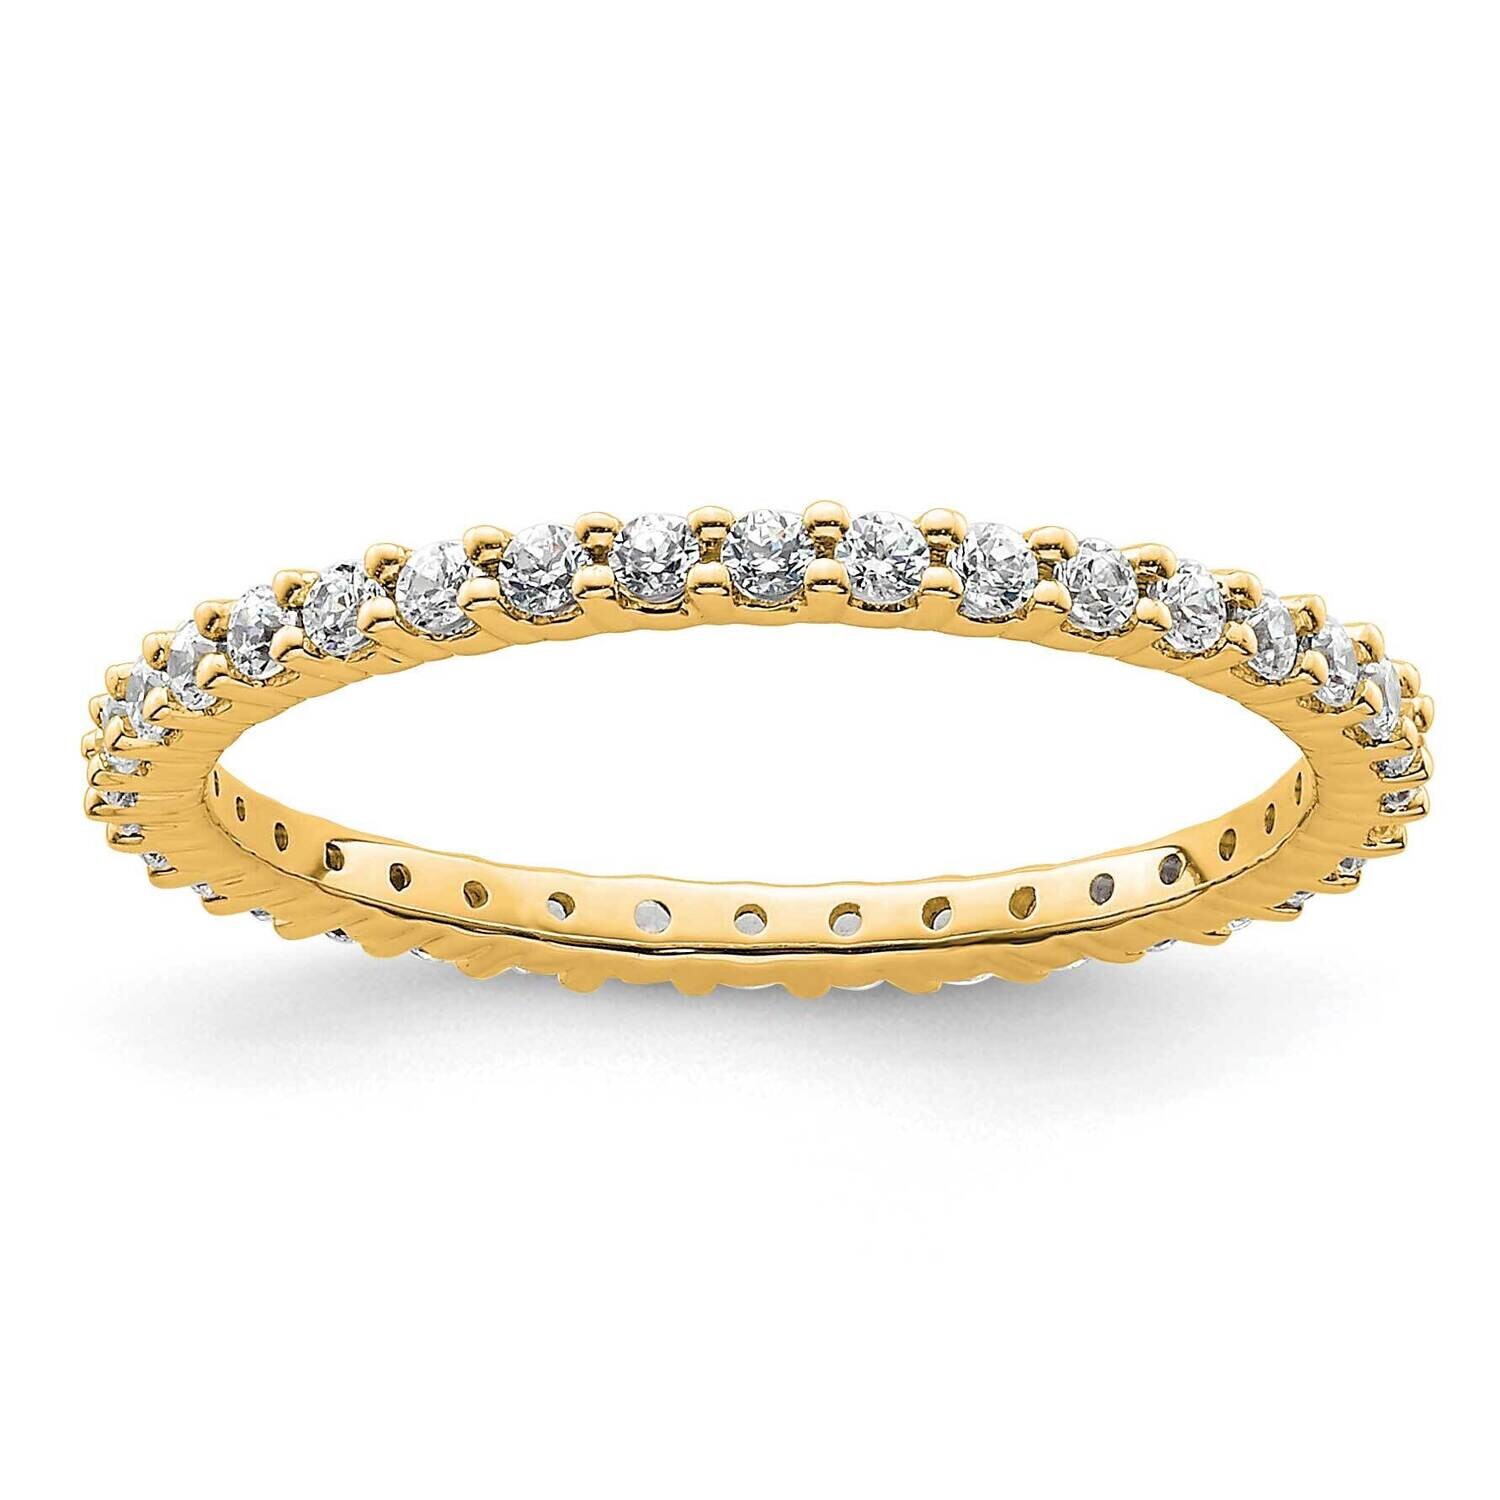 Shared Prong 1/2 Carat Diamond Complete Eternity Band 14k Polished Gold ET0001-050-6Y4